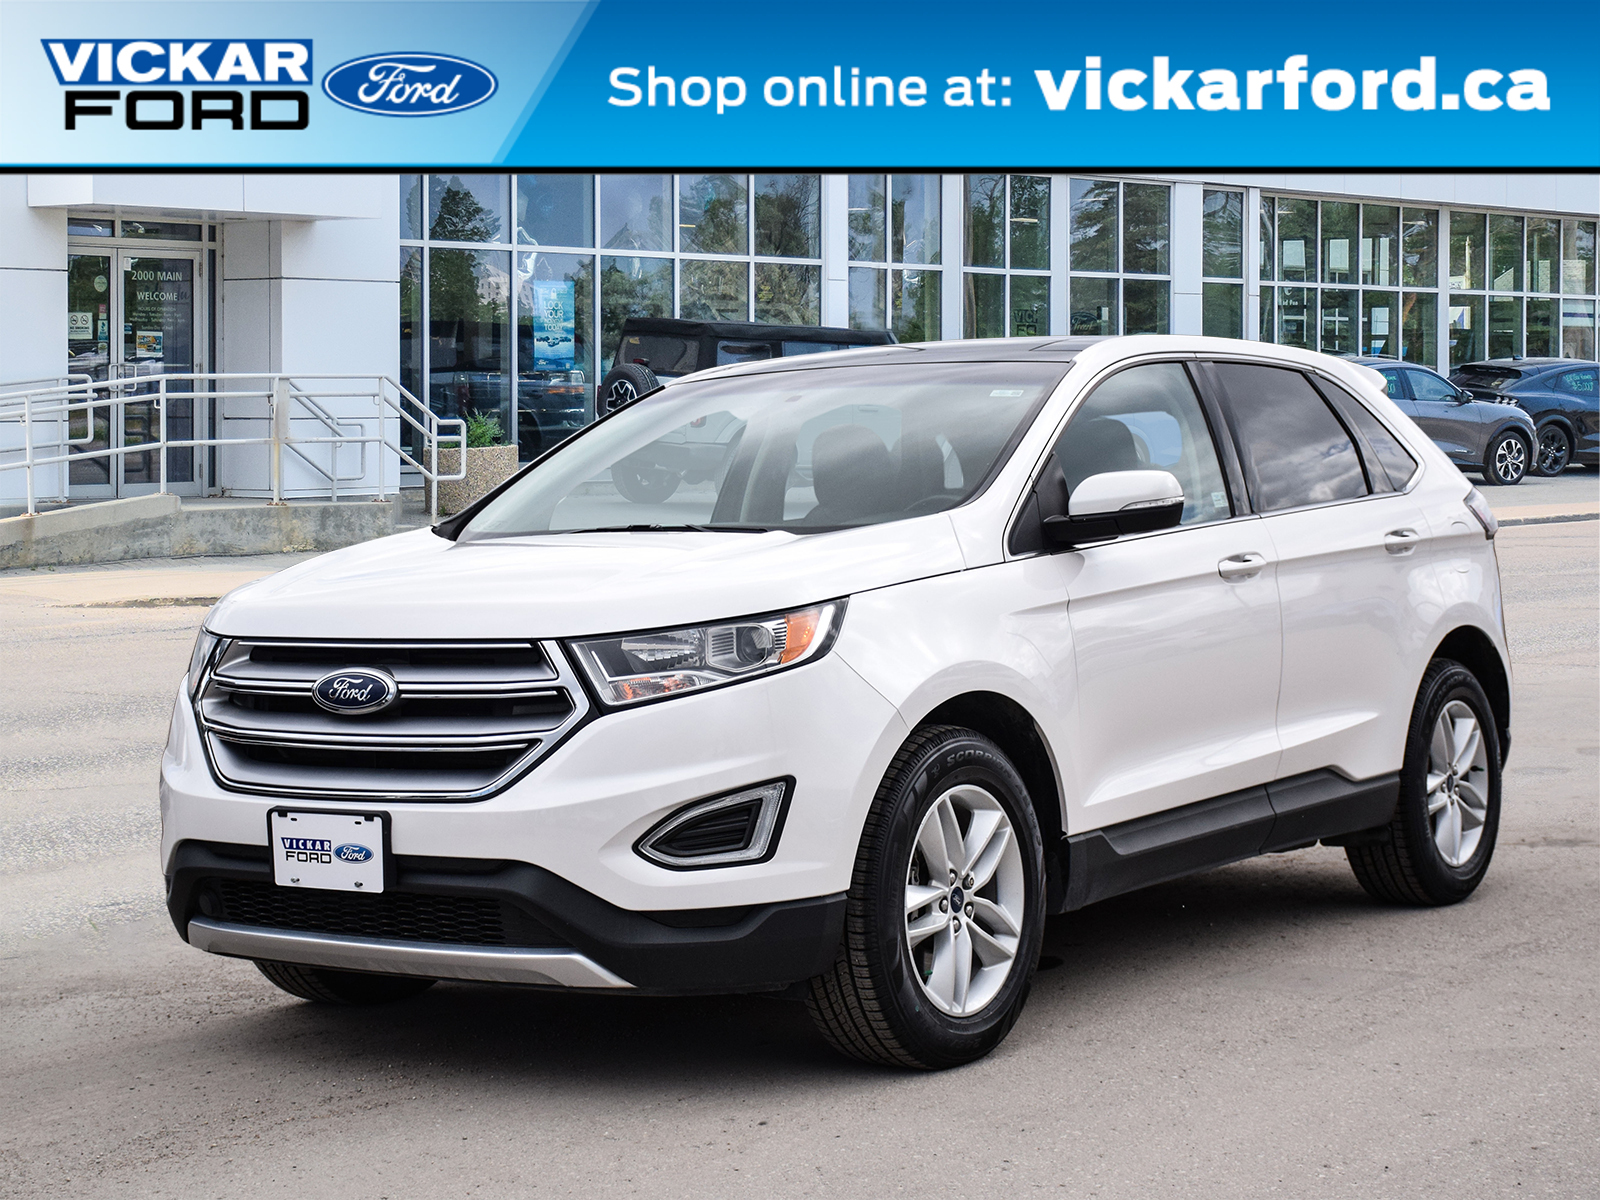 2018 Ford Edge SEL AWD 201A Touring Pkg Leather Pano Roof Navi